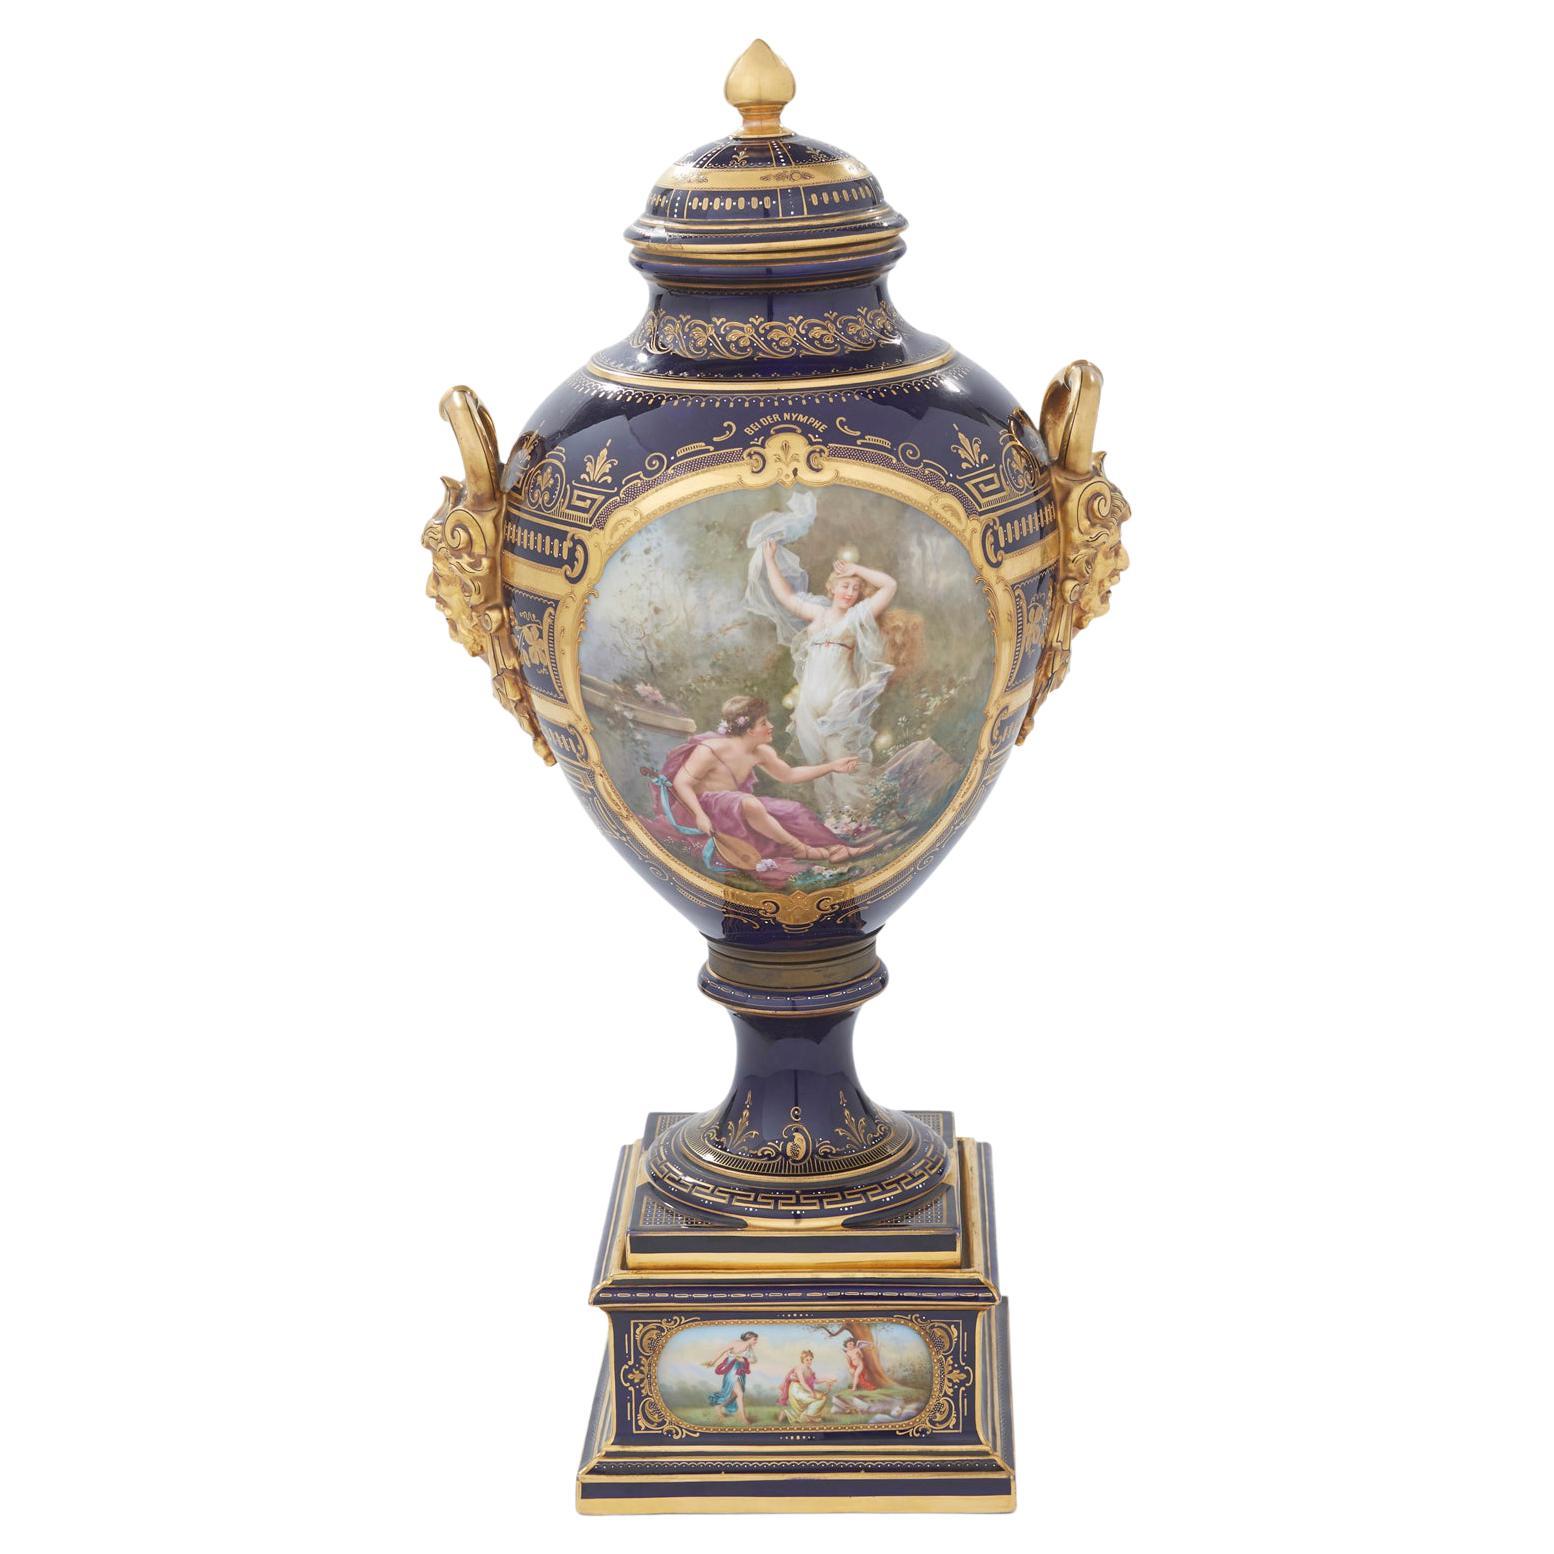 19th Century Gilt Gold Decorative Covered Urn